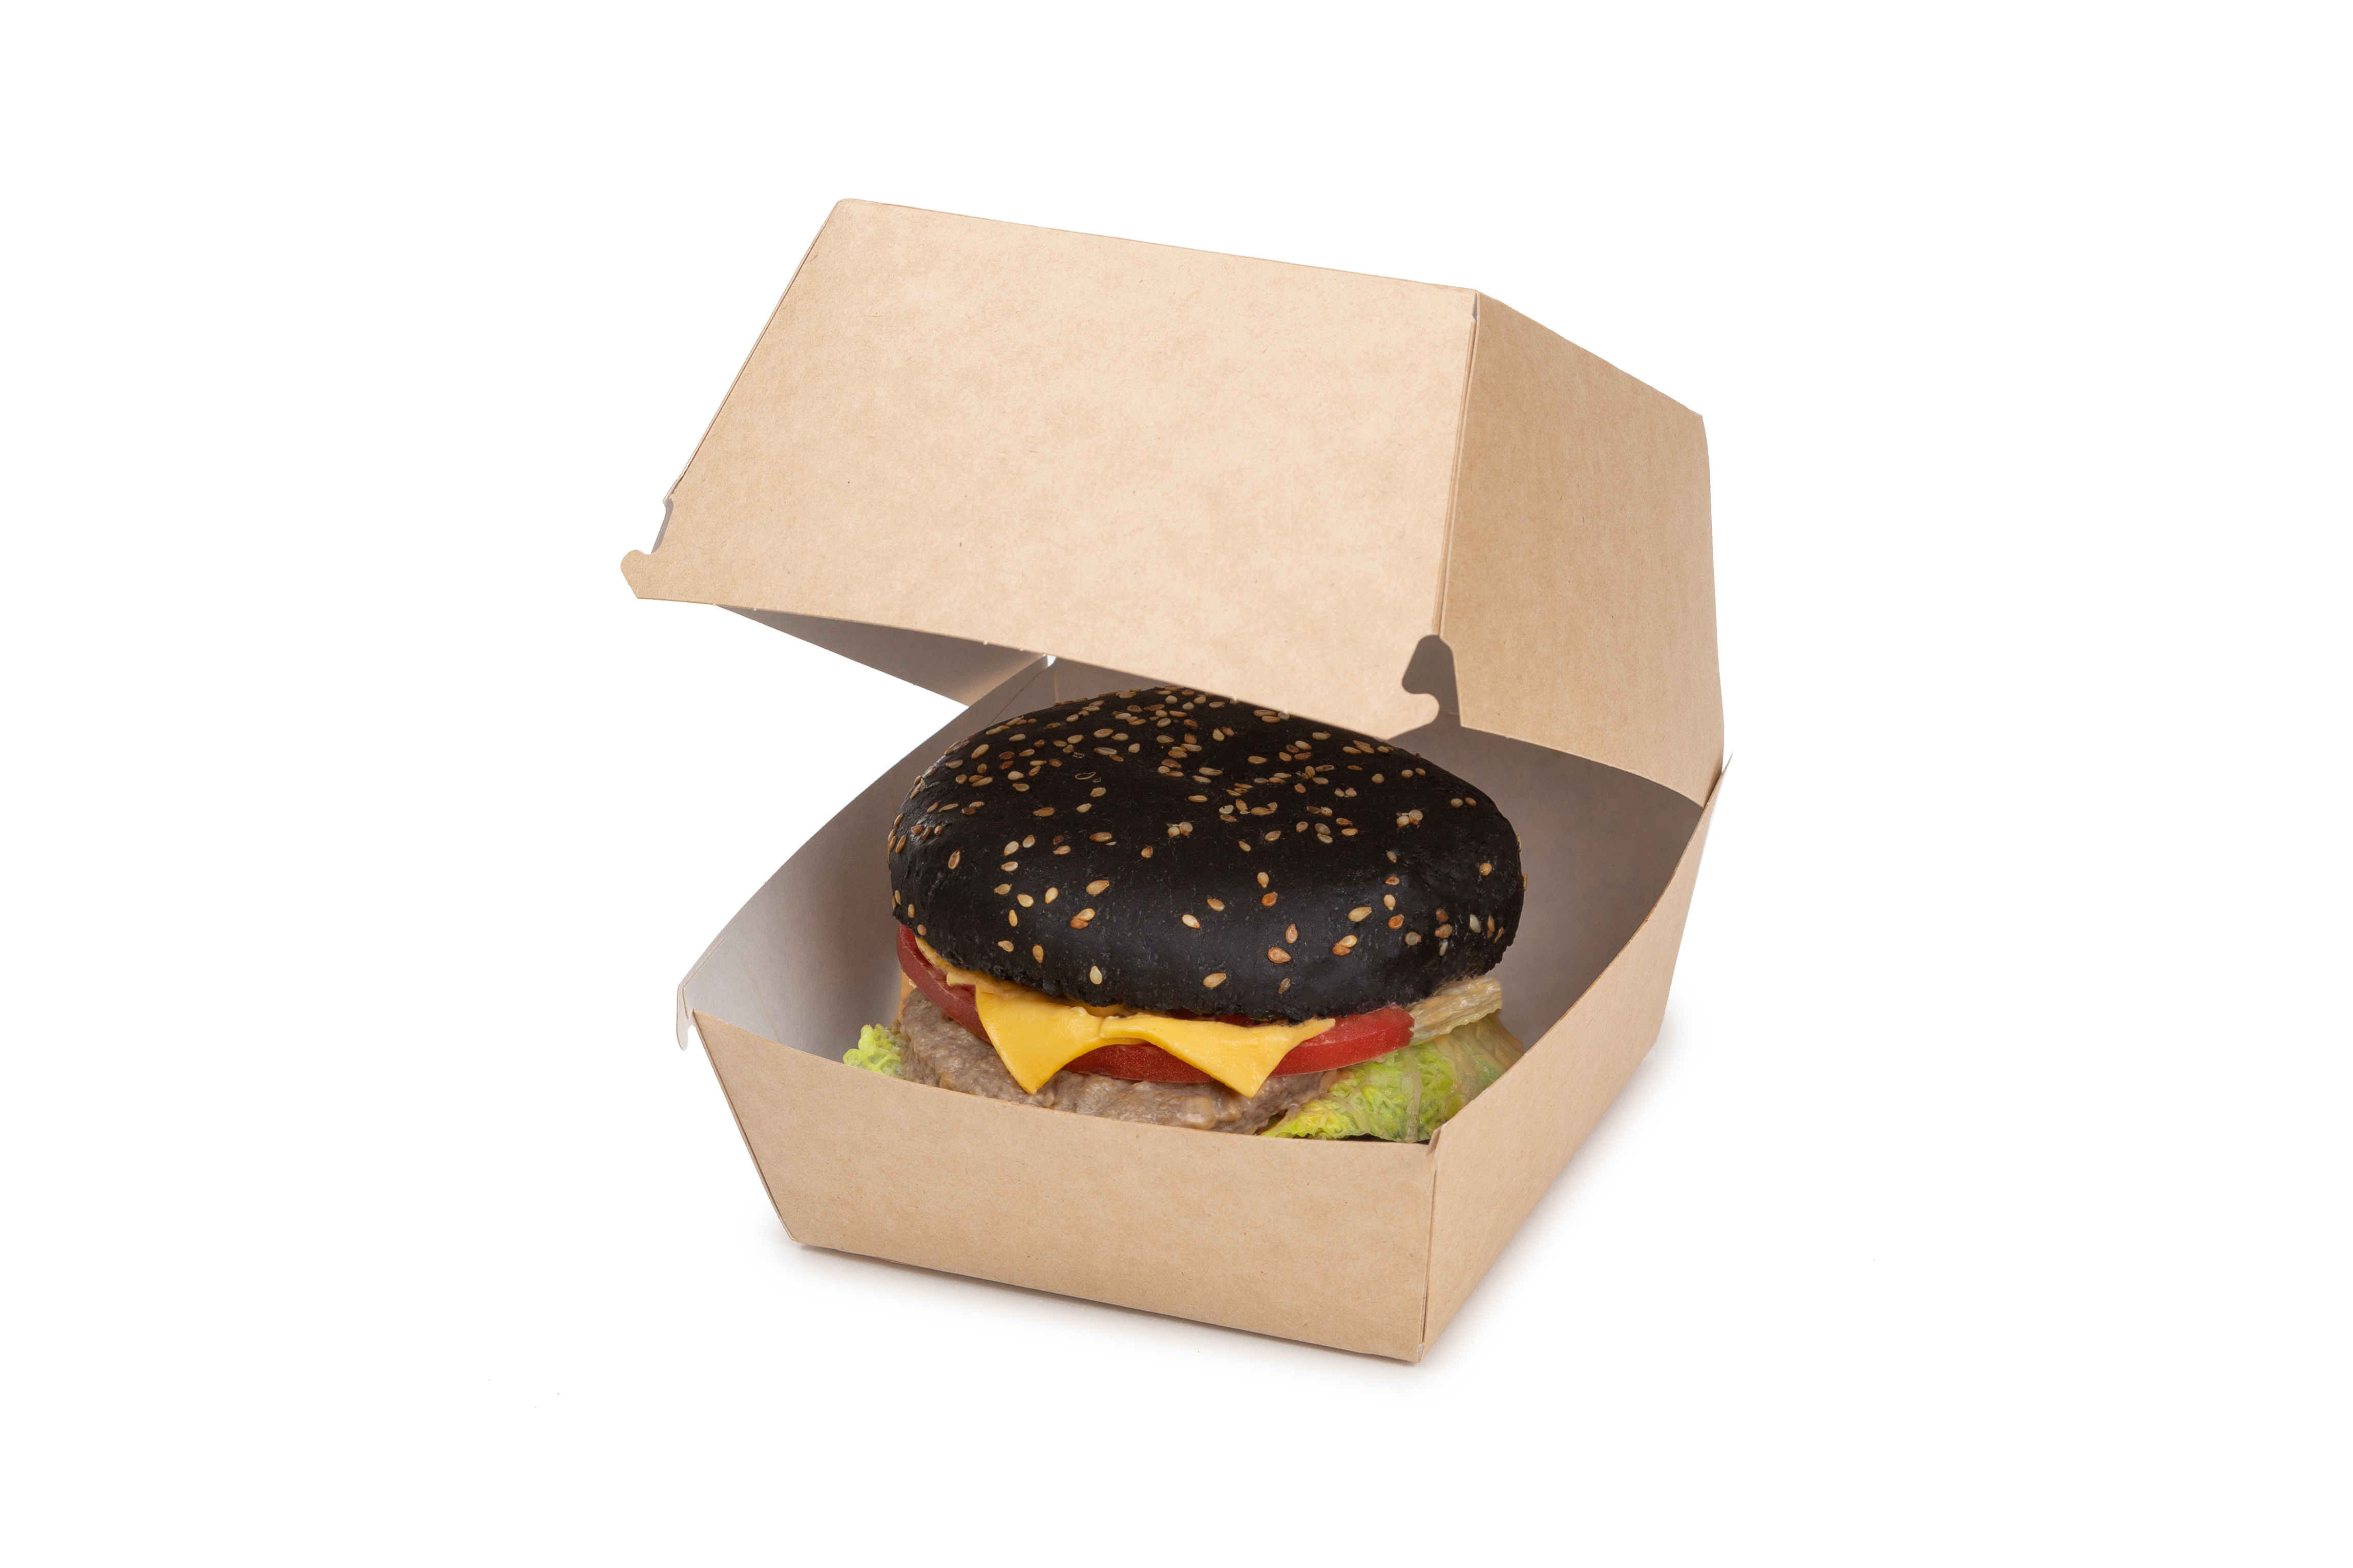 OSQ BURGER L packaging for burgers